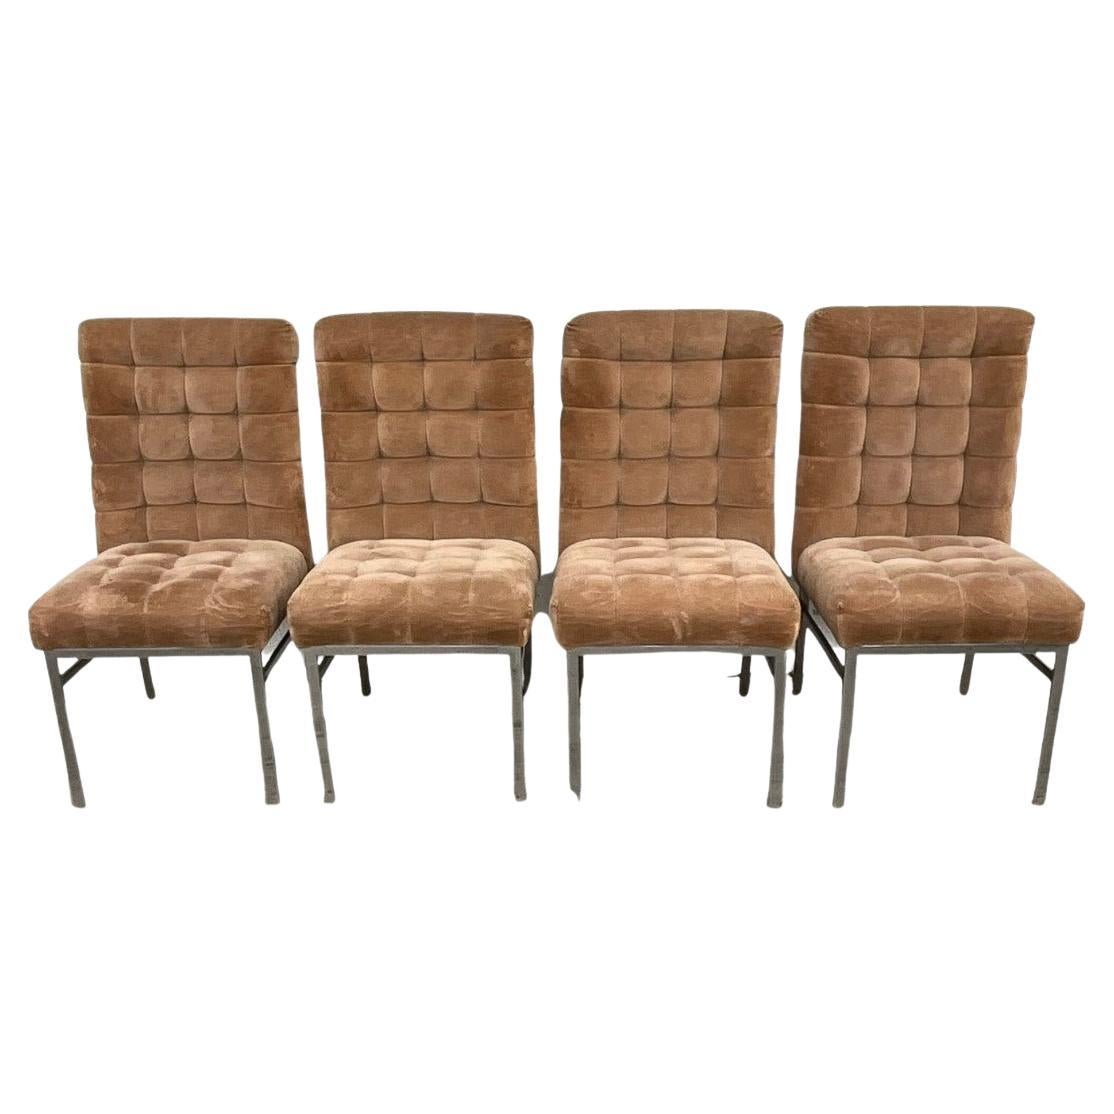 Set of 4 Pierre Cardin Dining Chairs For Sale